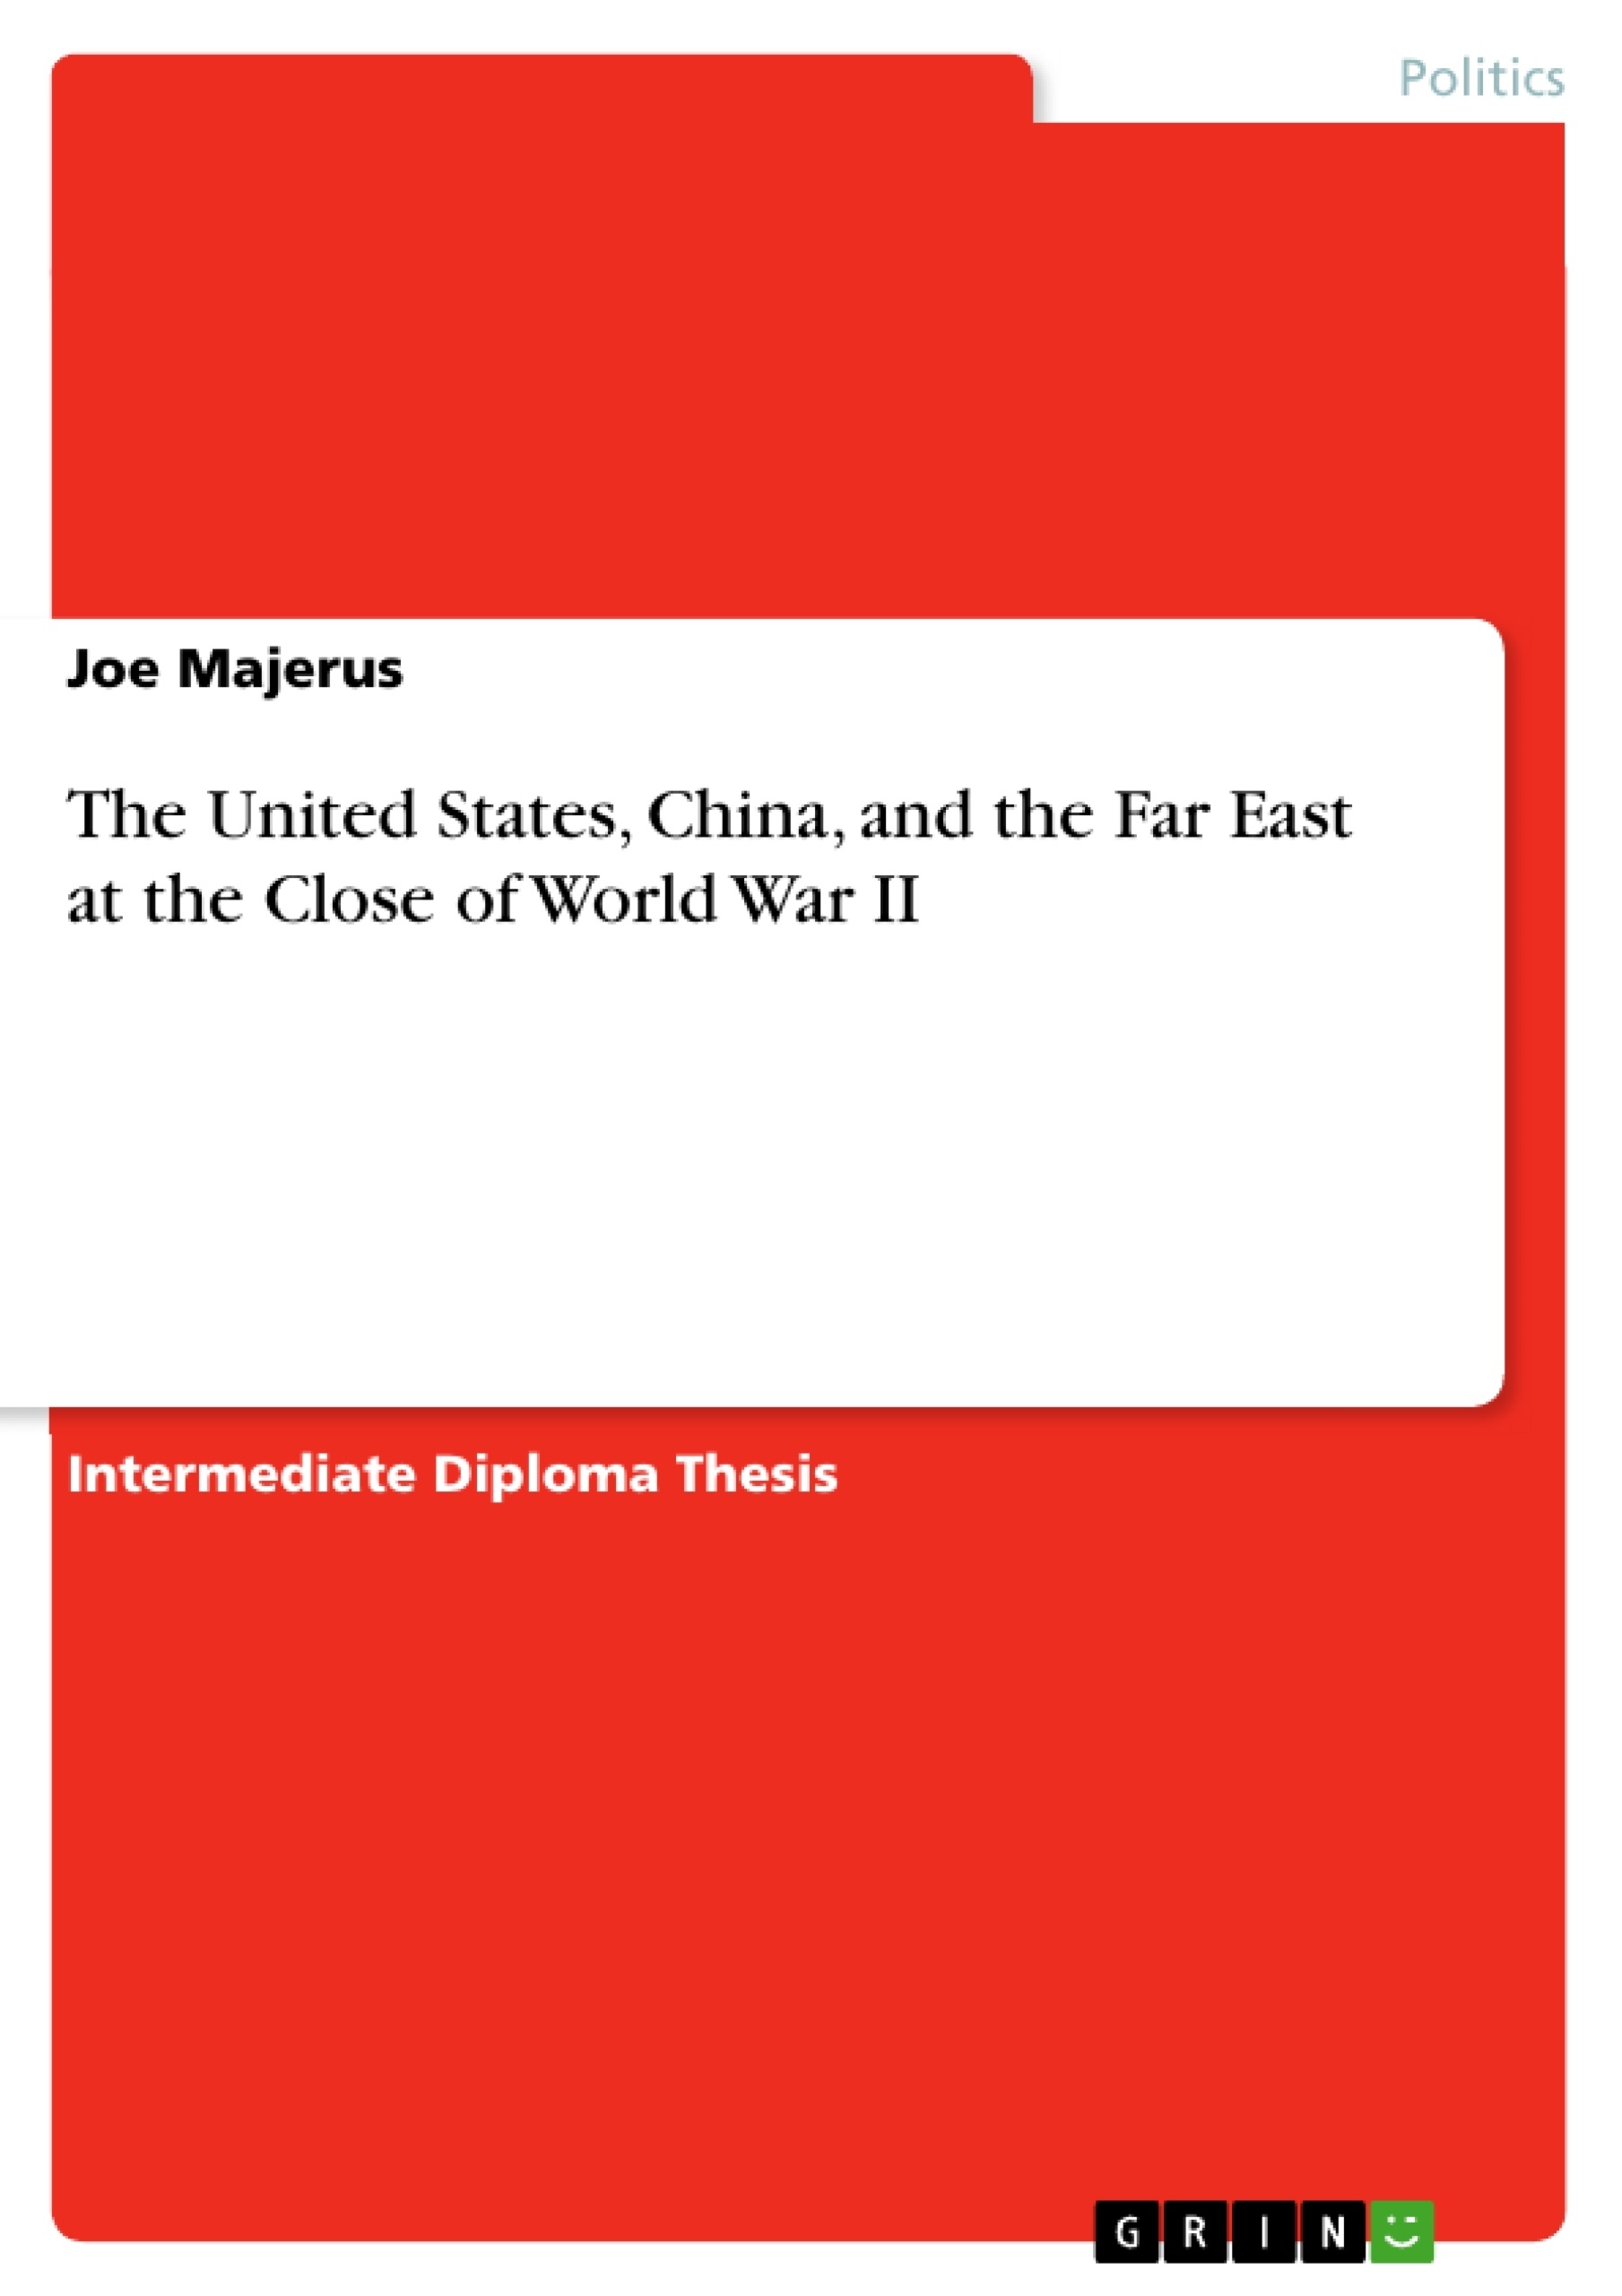 Title: The United States, China, and the Far East at the Close of World War II